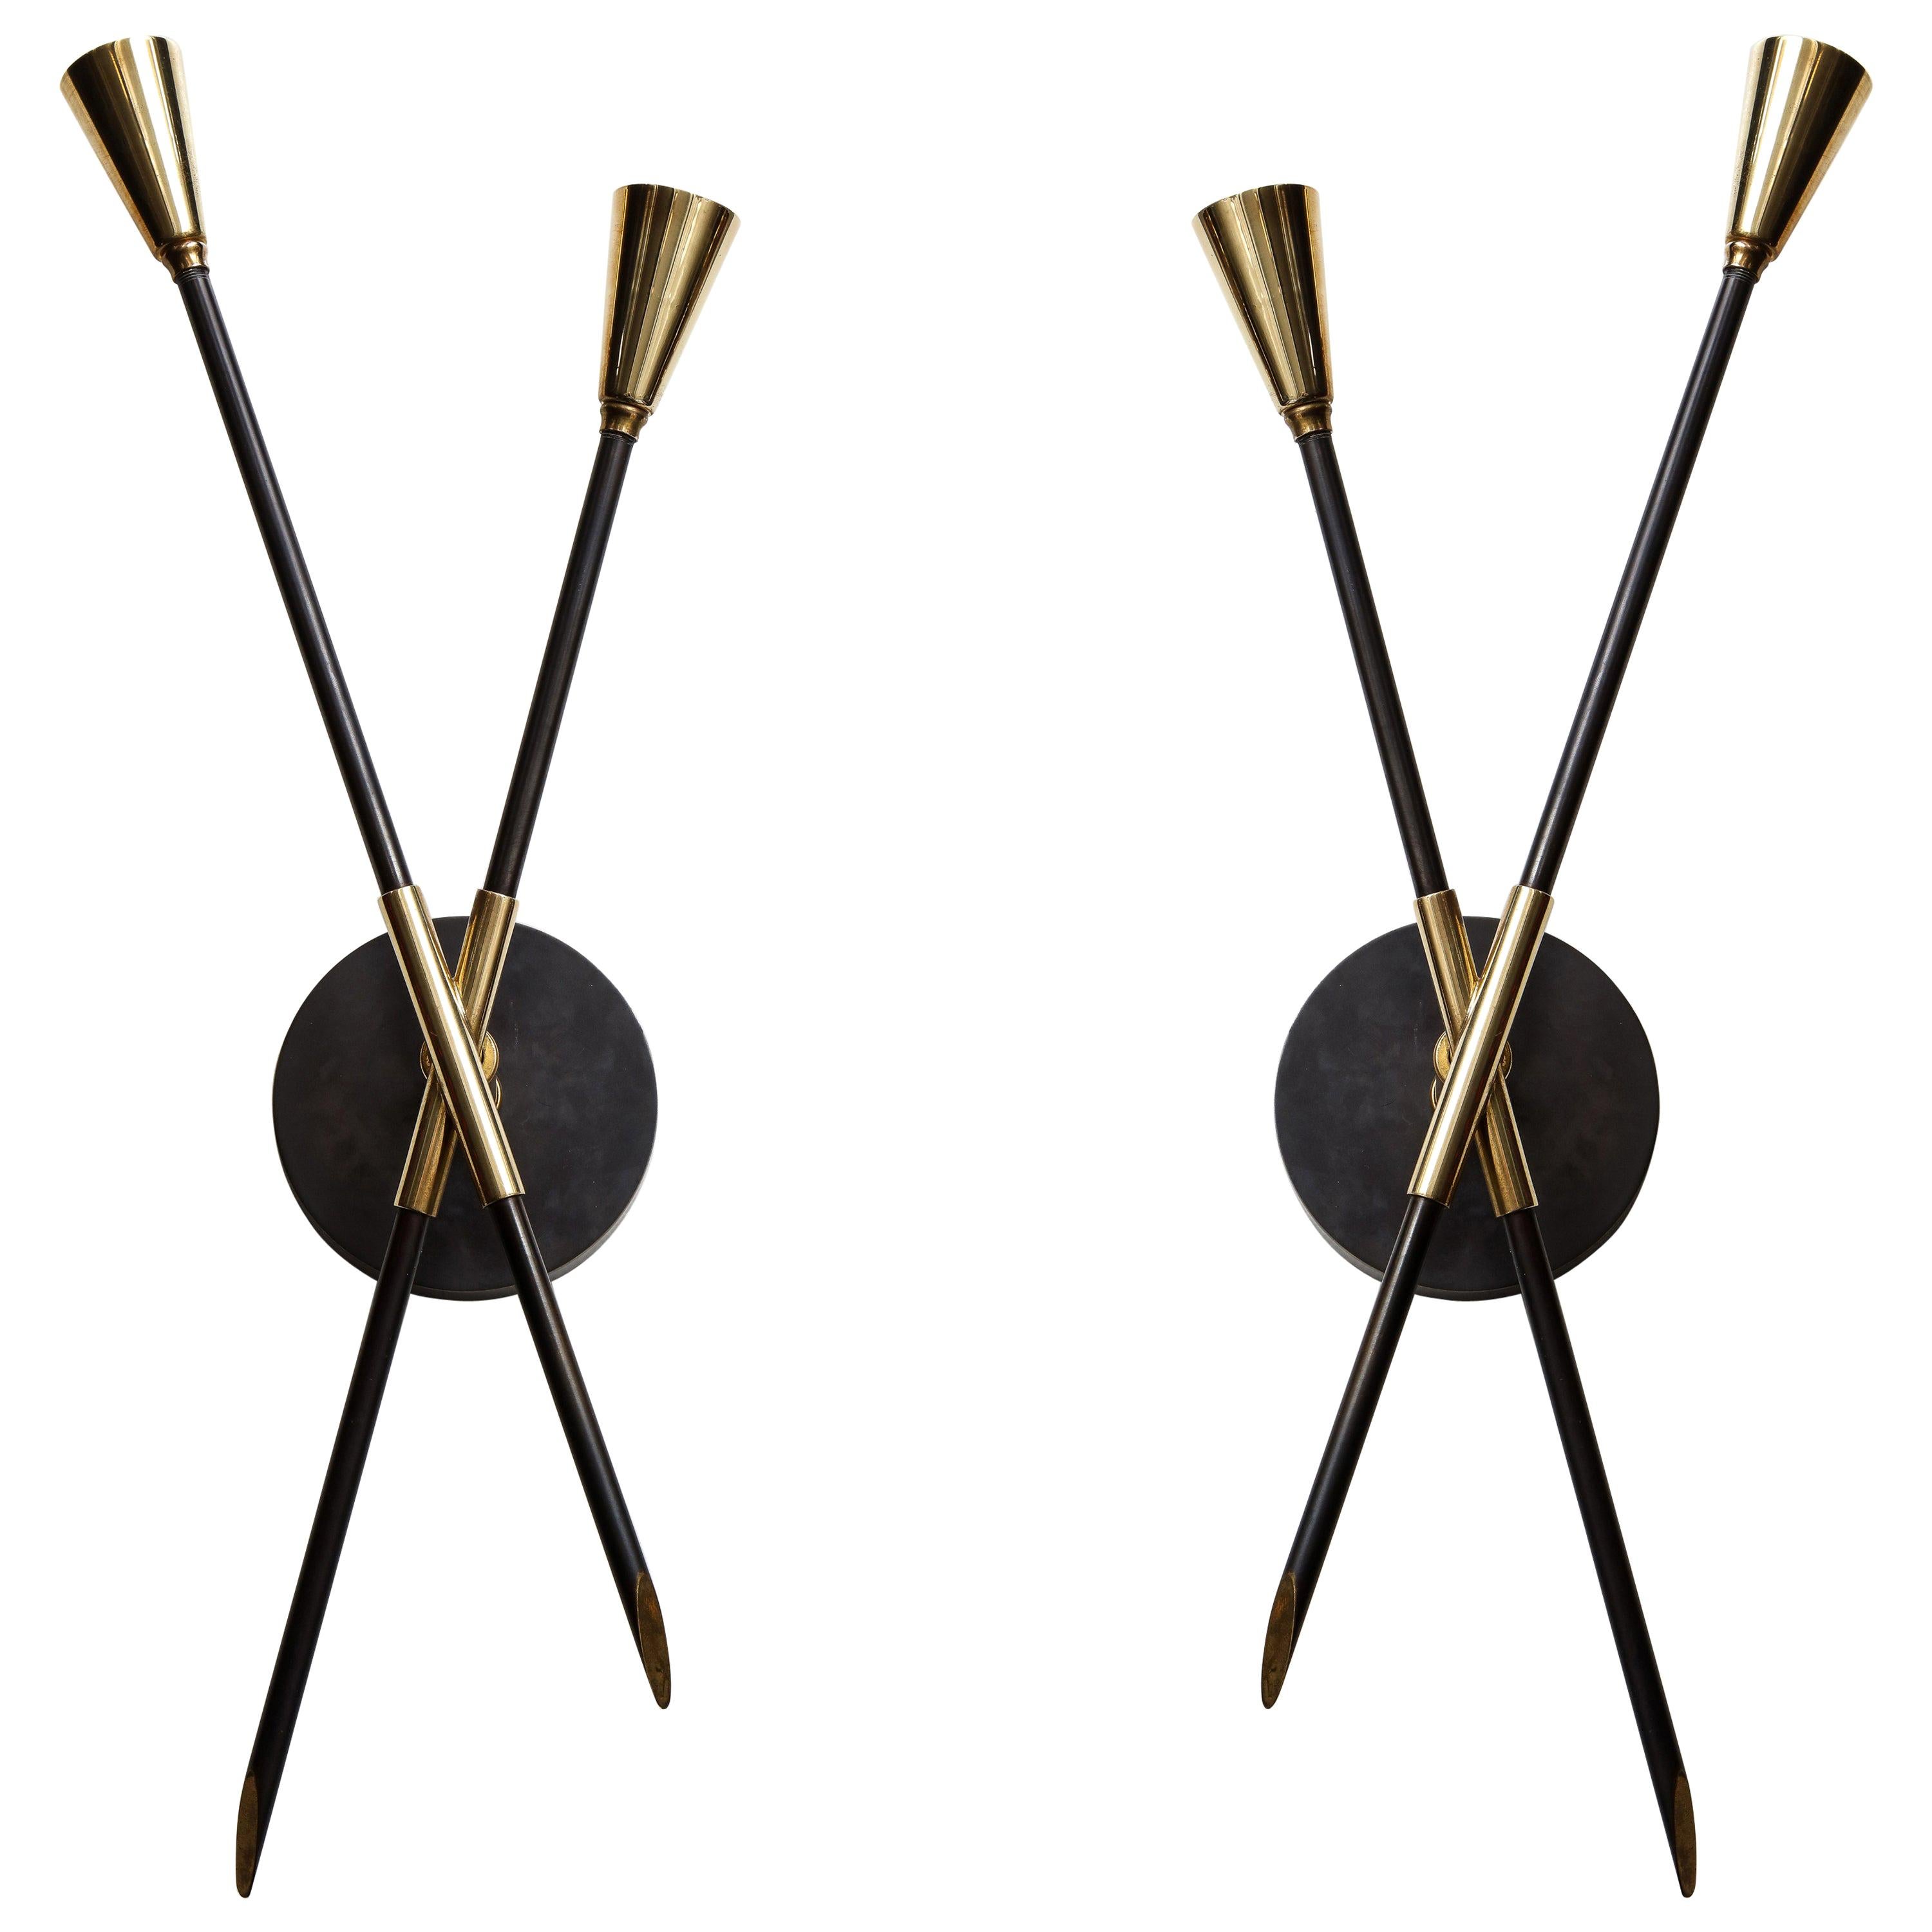 Pair of Custom Brass and Bronze Sconces Inspired by Midcentury Design